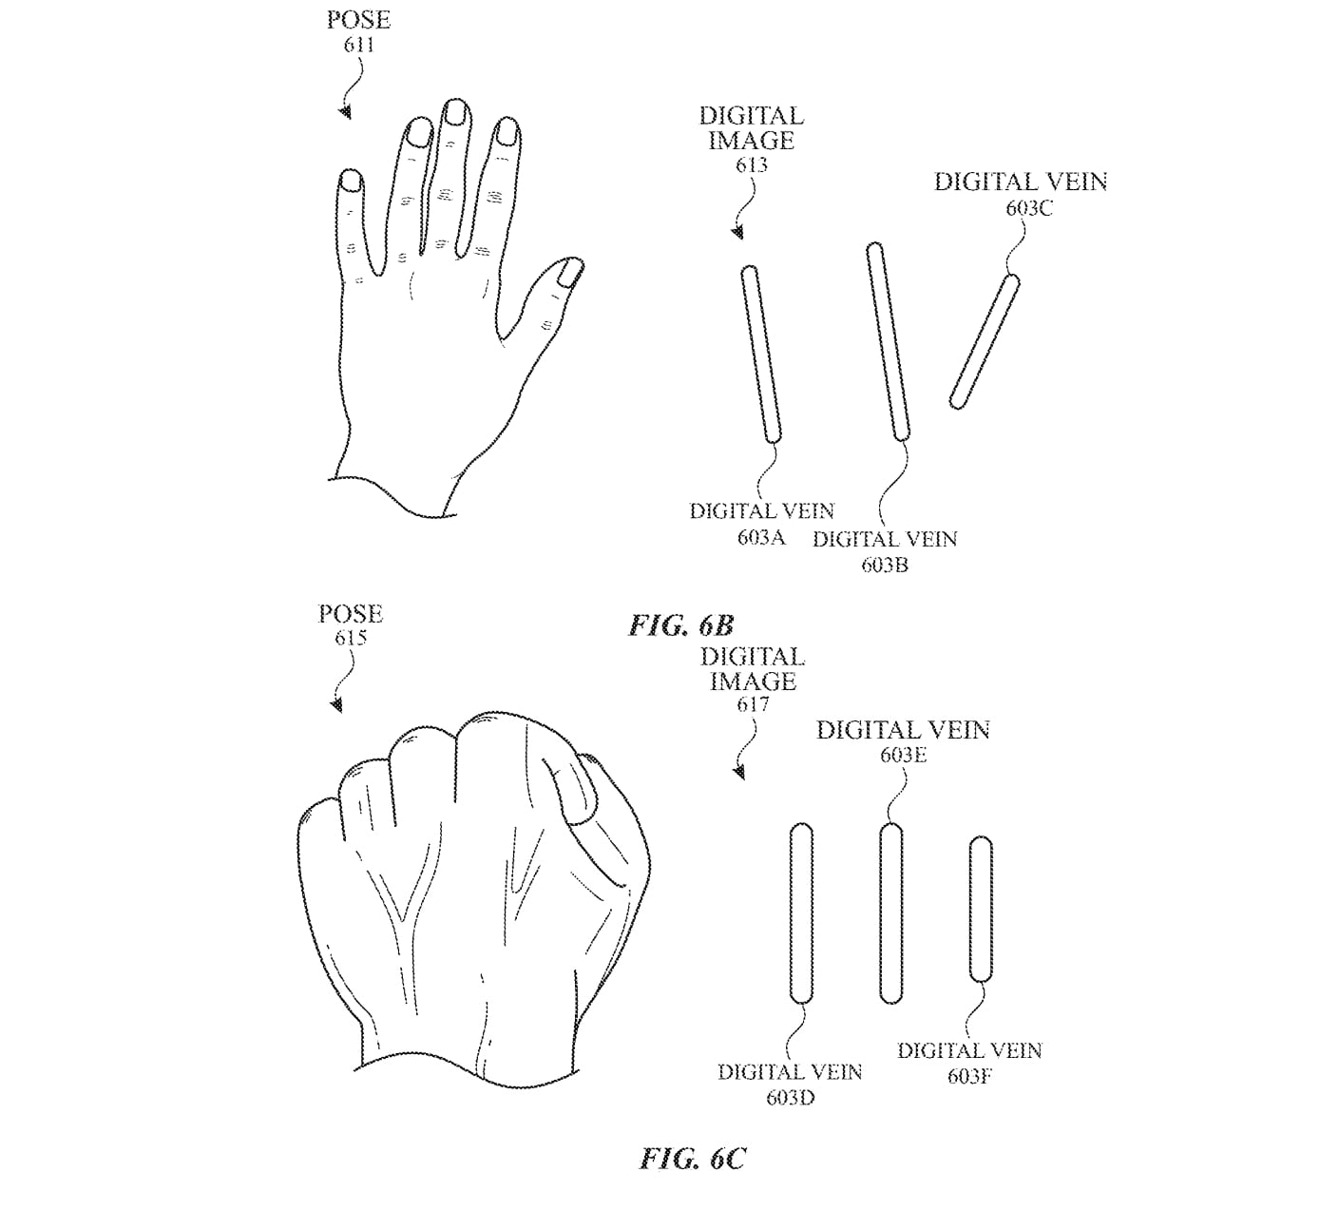 Changing a hand gesture can alter the vein positions in a wrist. 